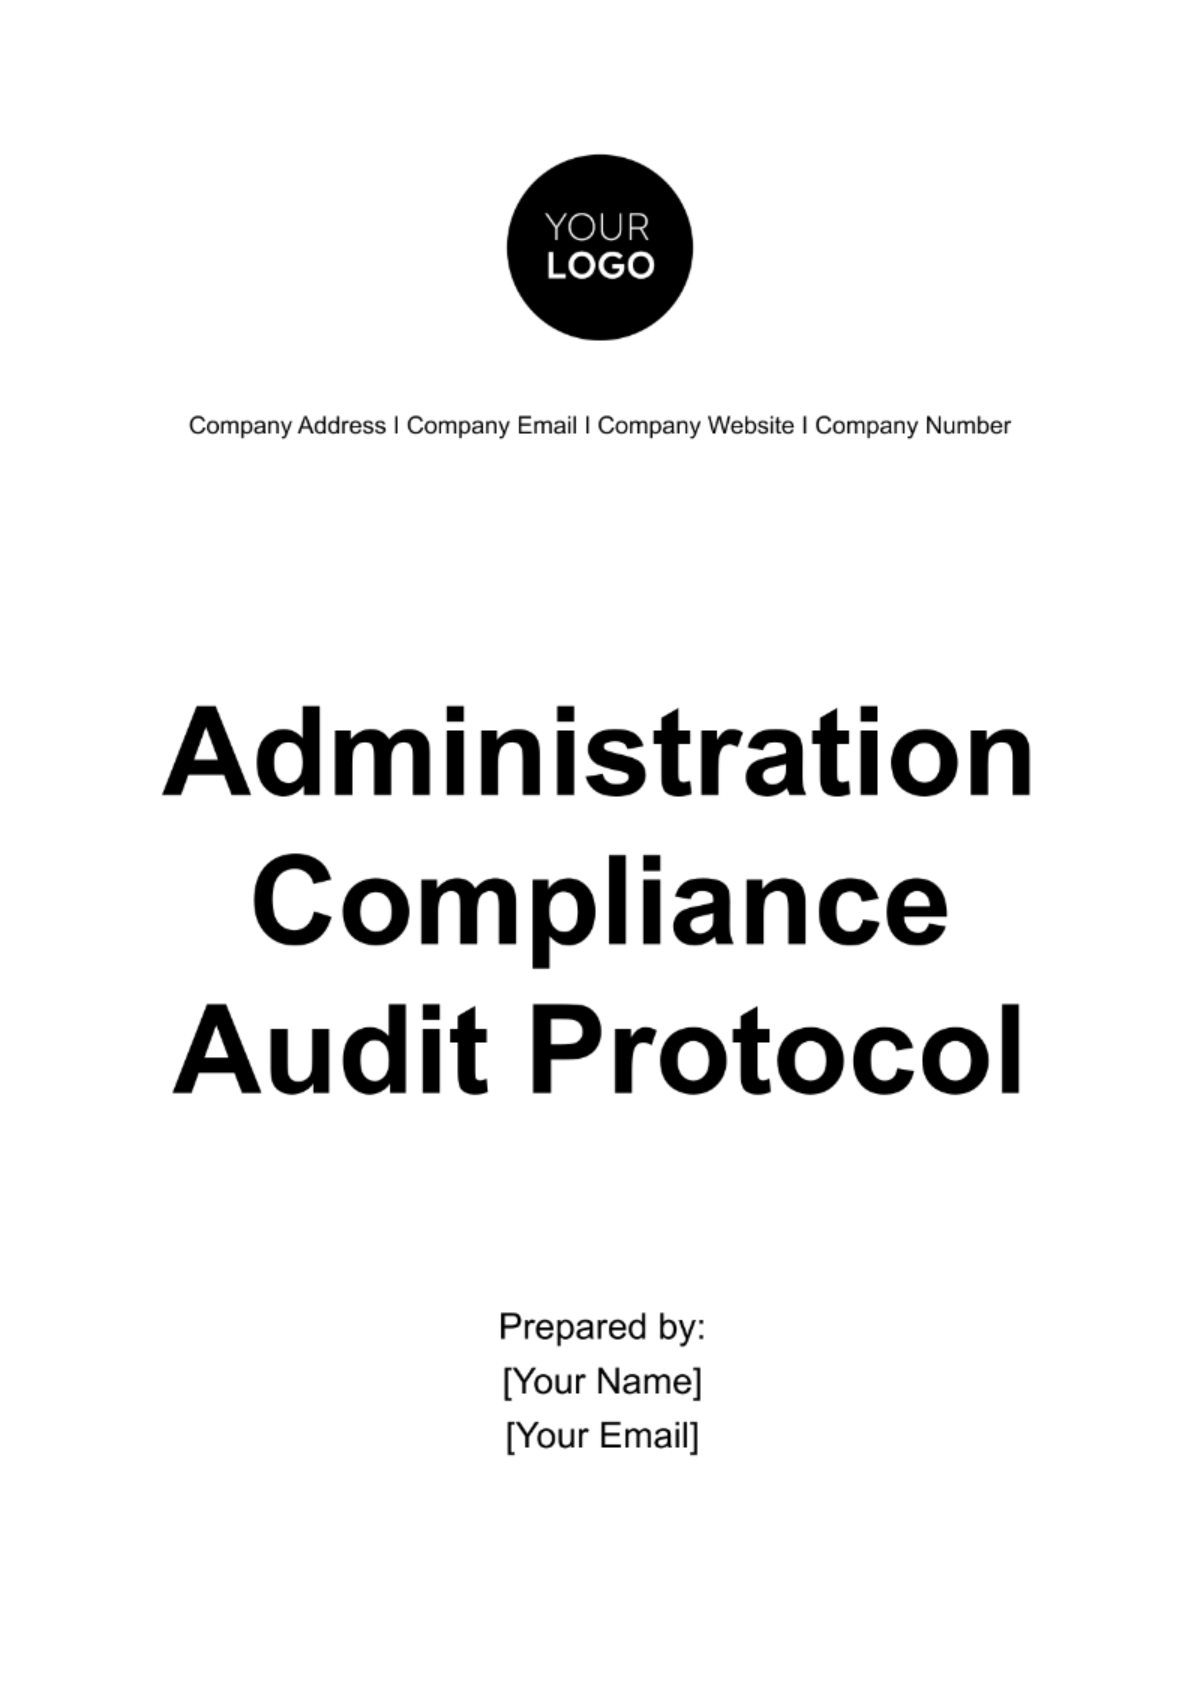 Free Administration Compliance Audit Protocol Template